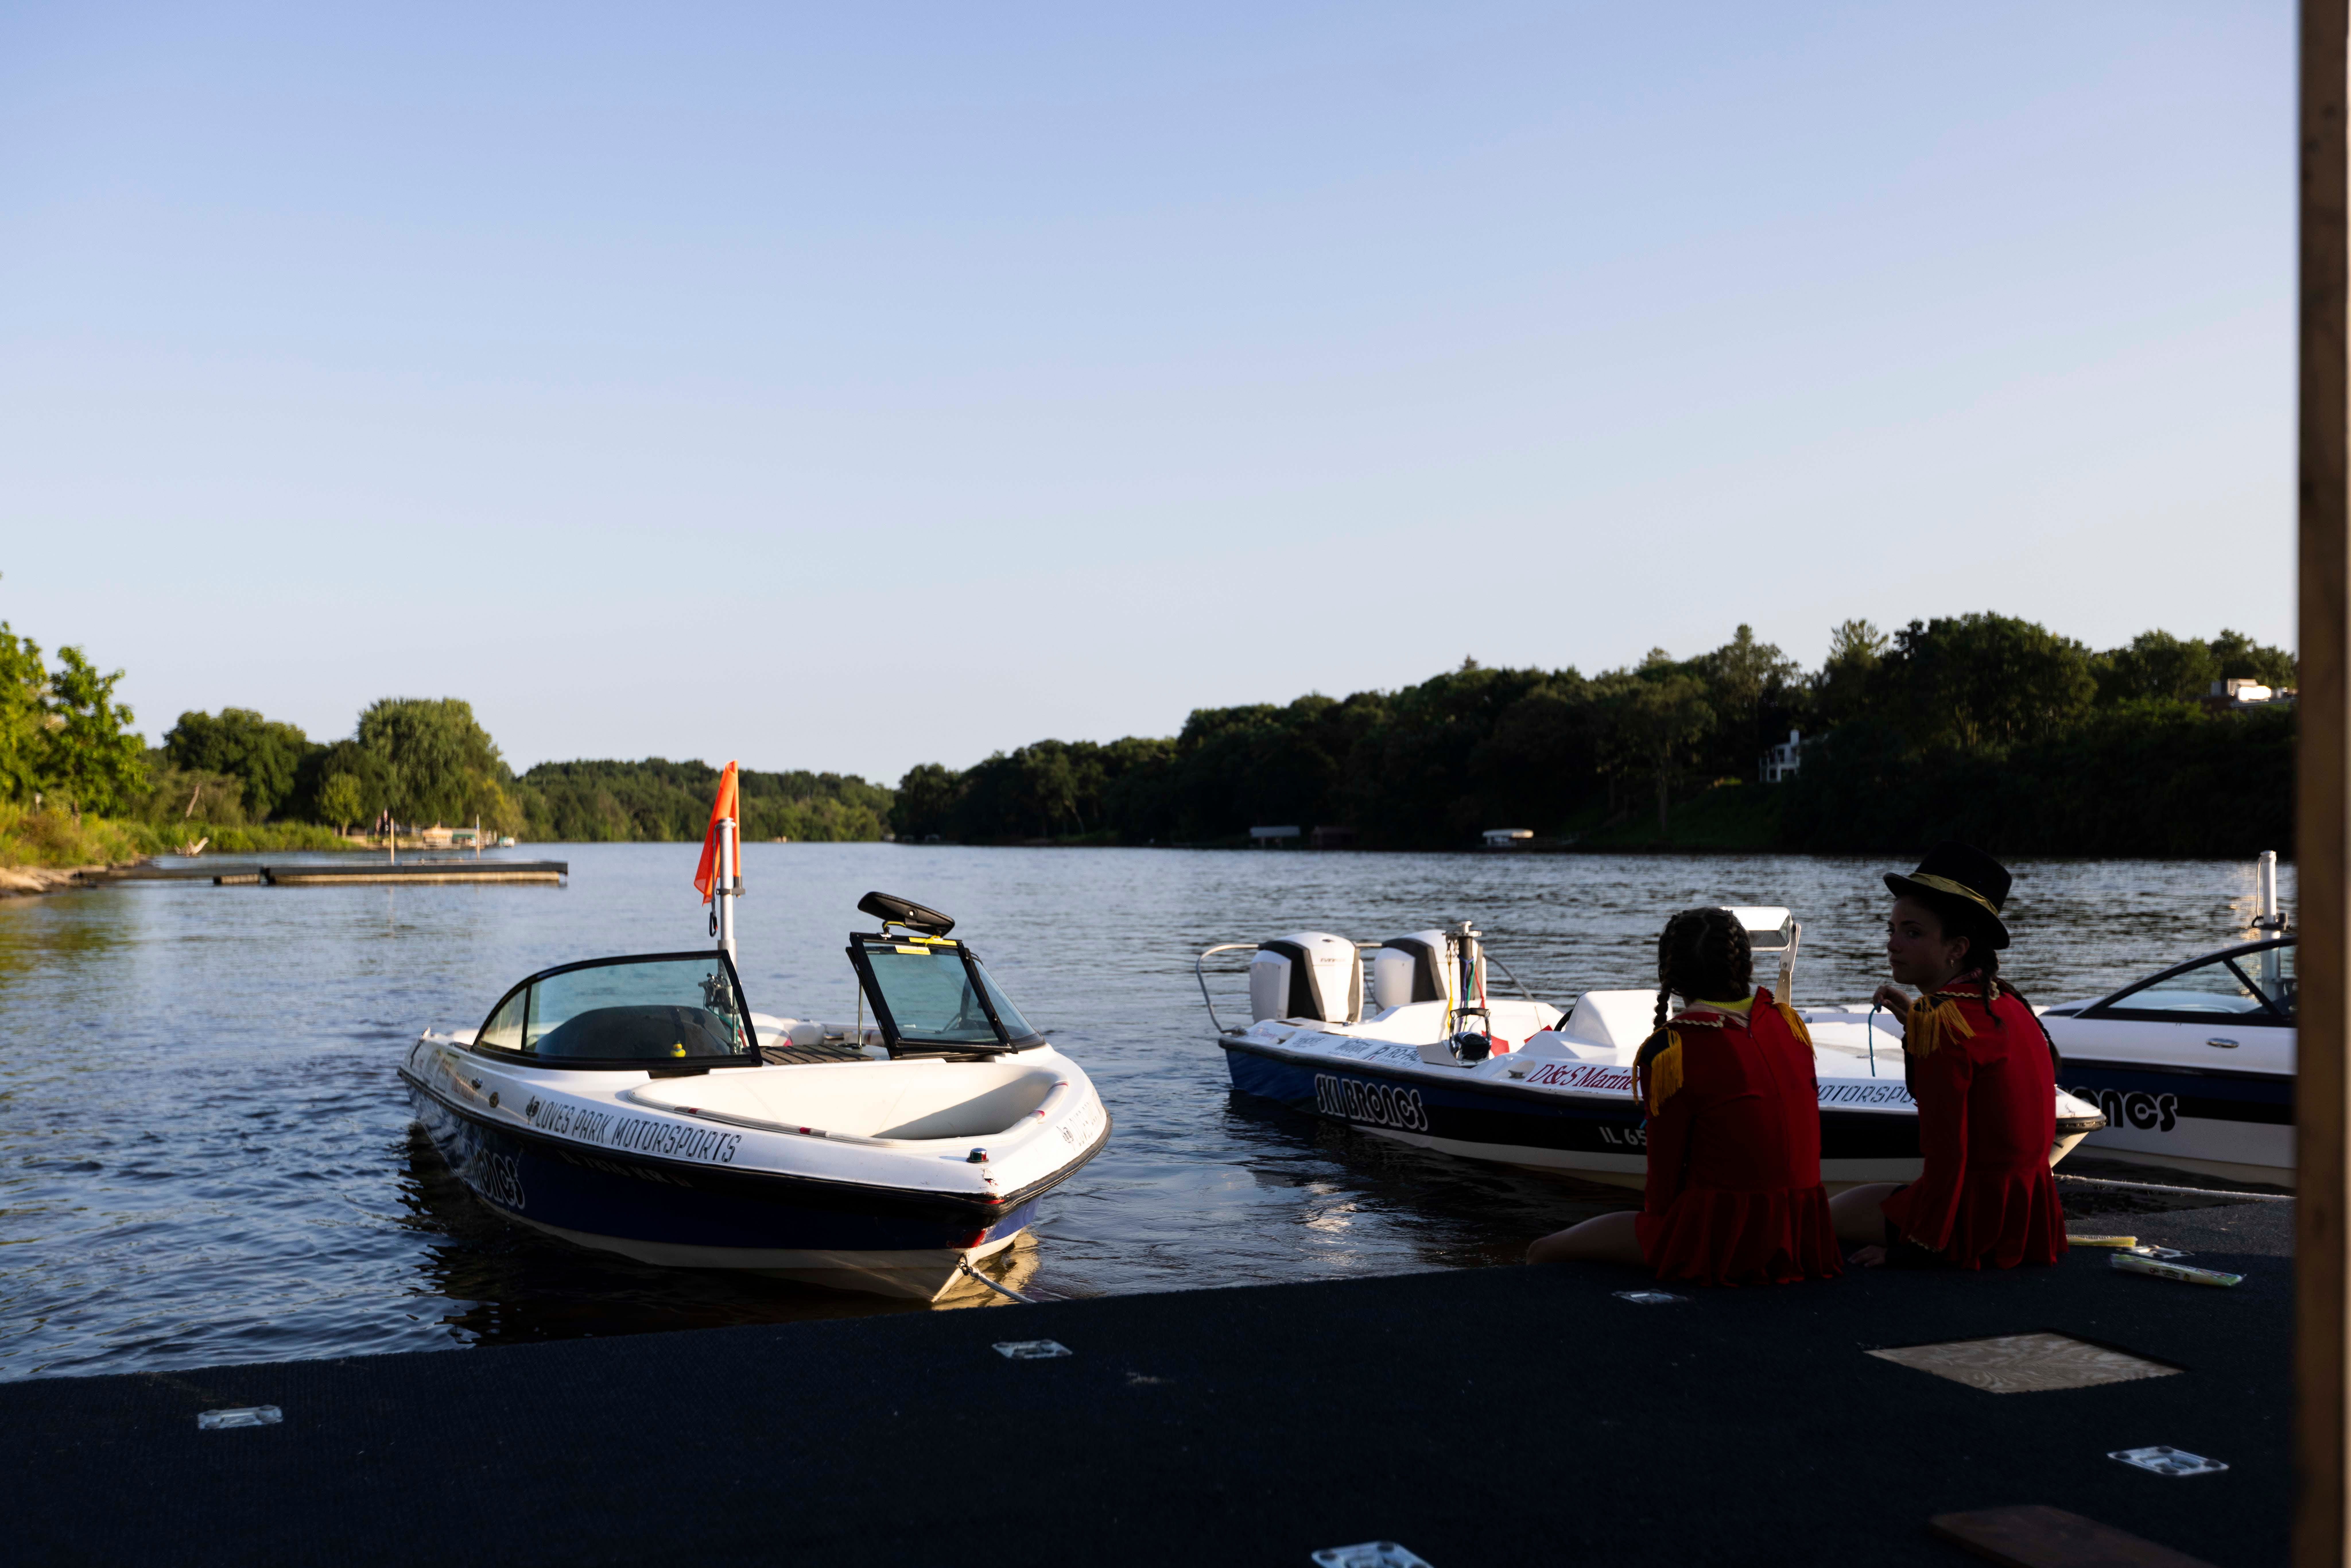 Flood debris, speed limits meant a slow summer on the Rock River. Will the boats return?